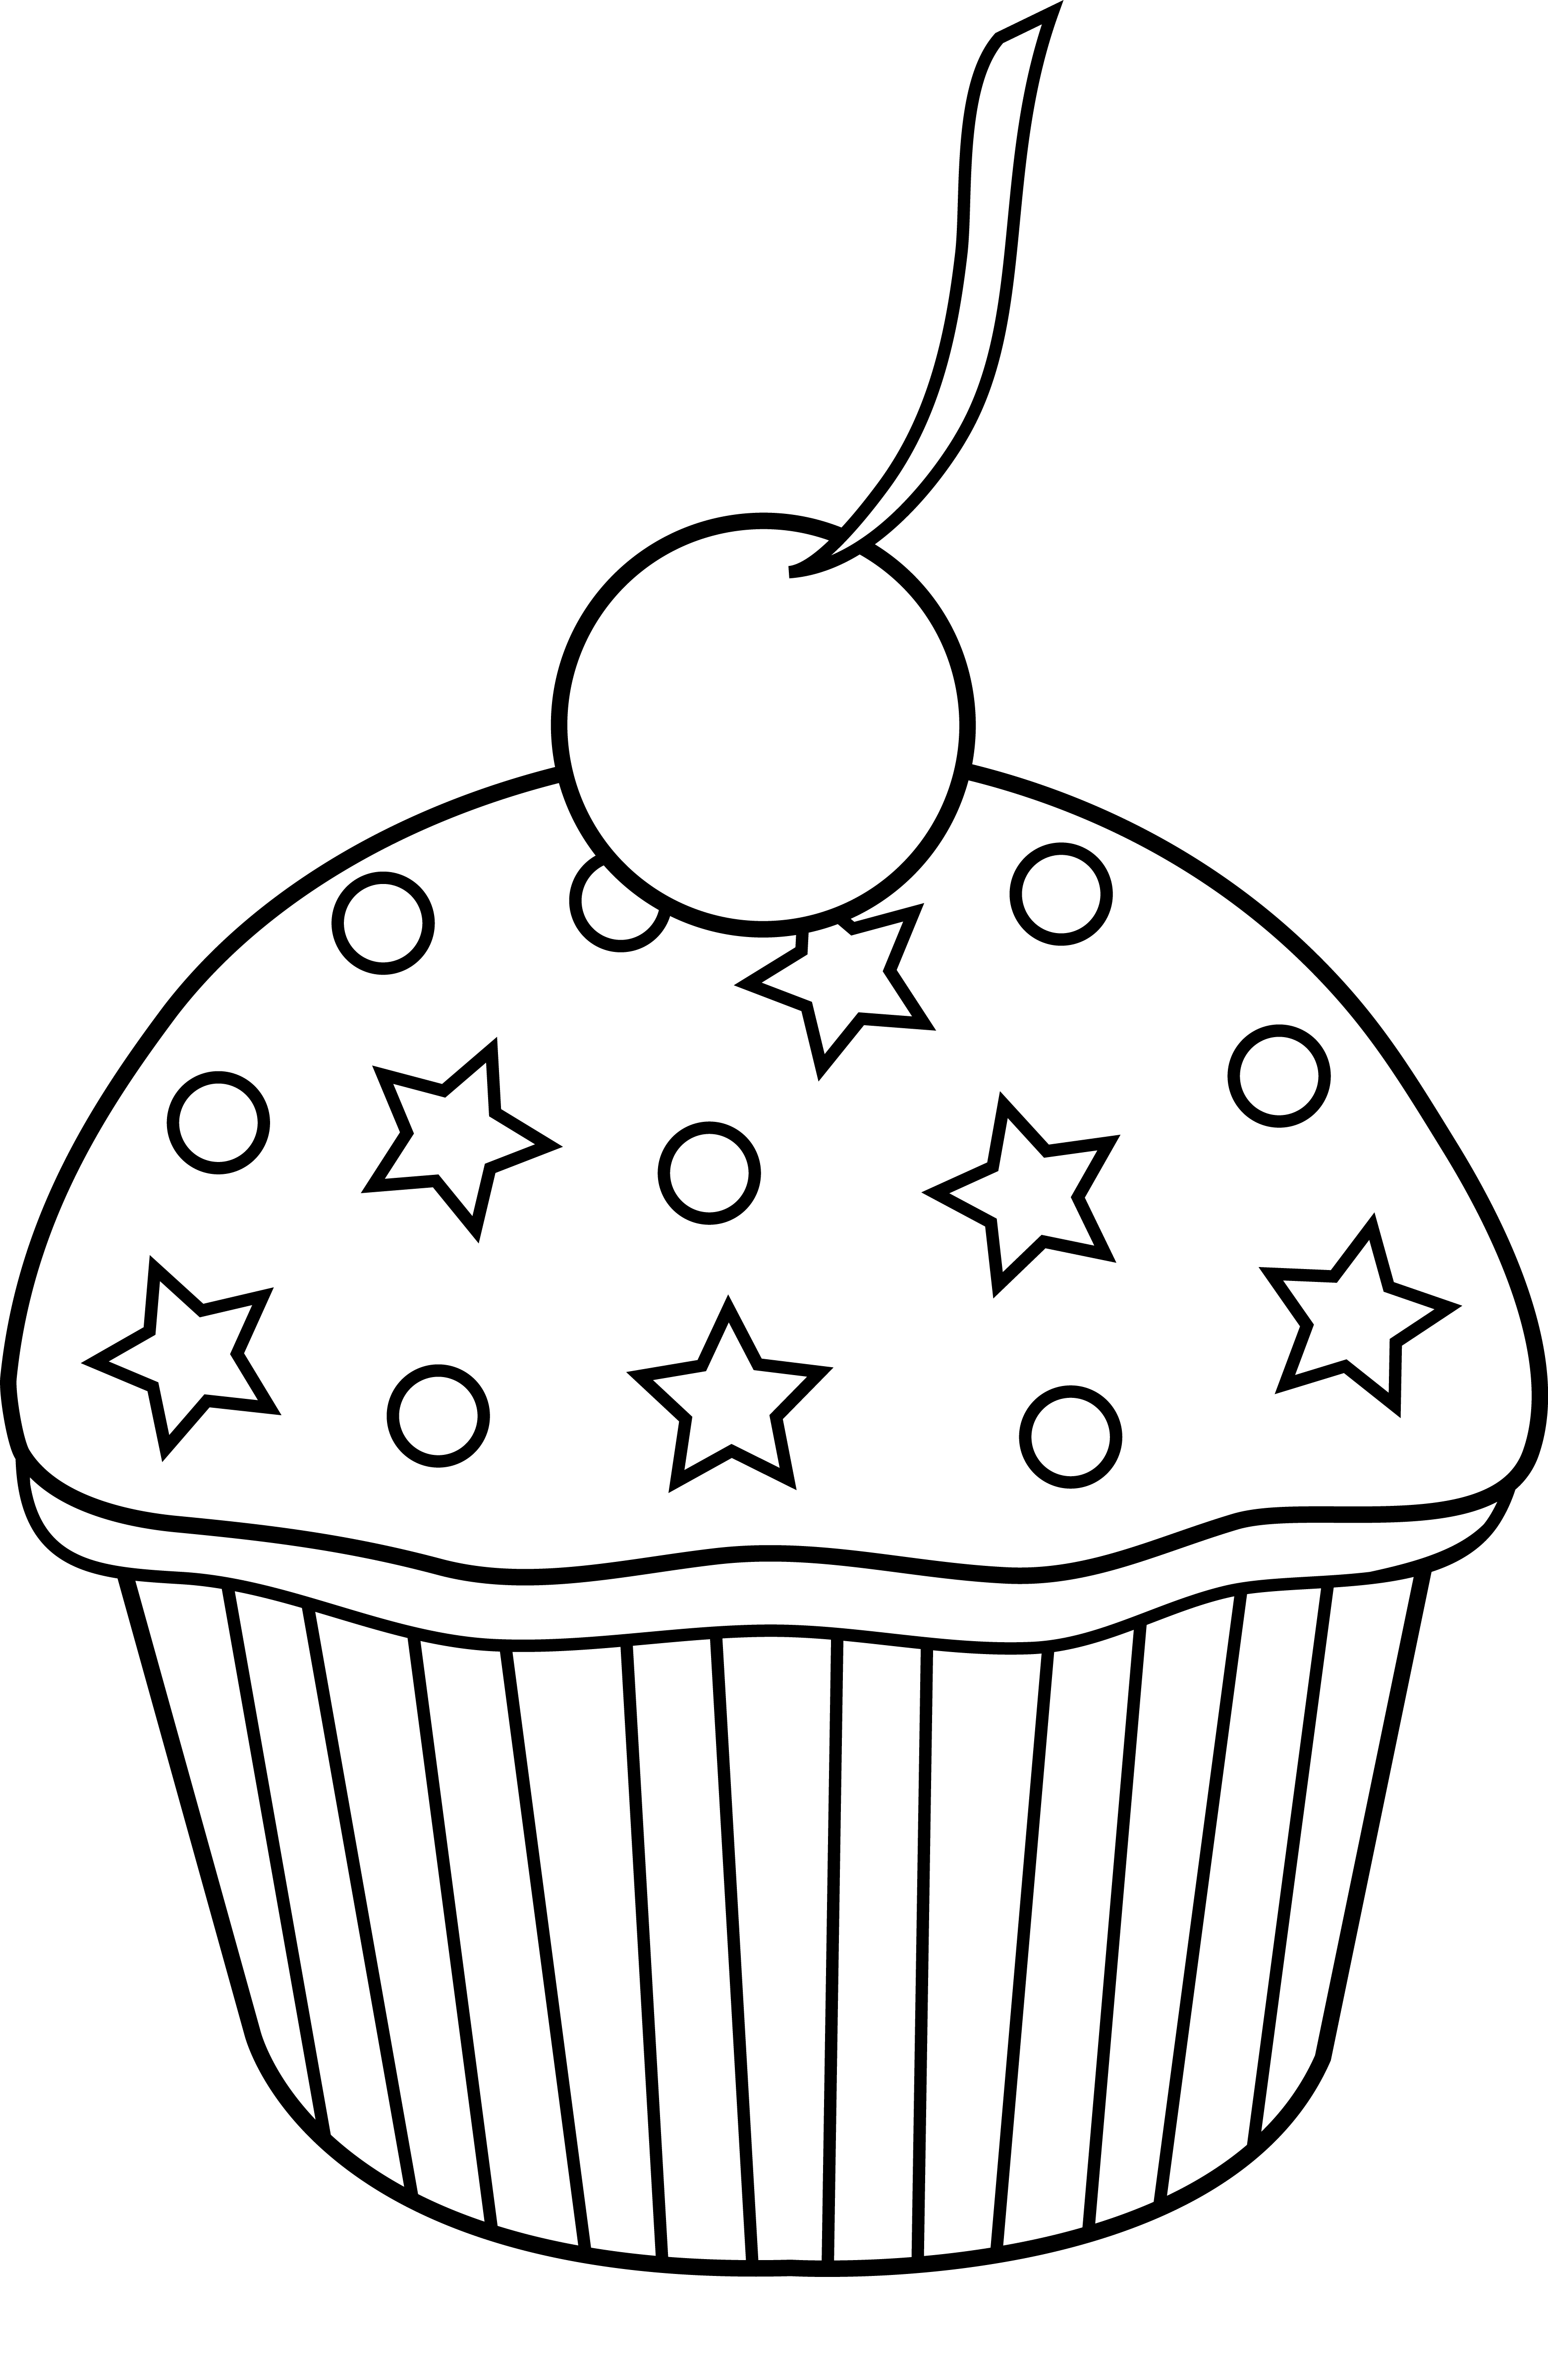 Cupcake Cup Cake Art Of White Party Clipart